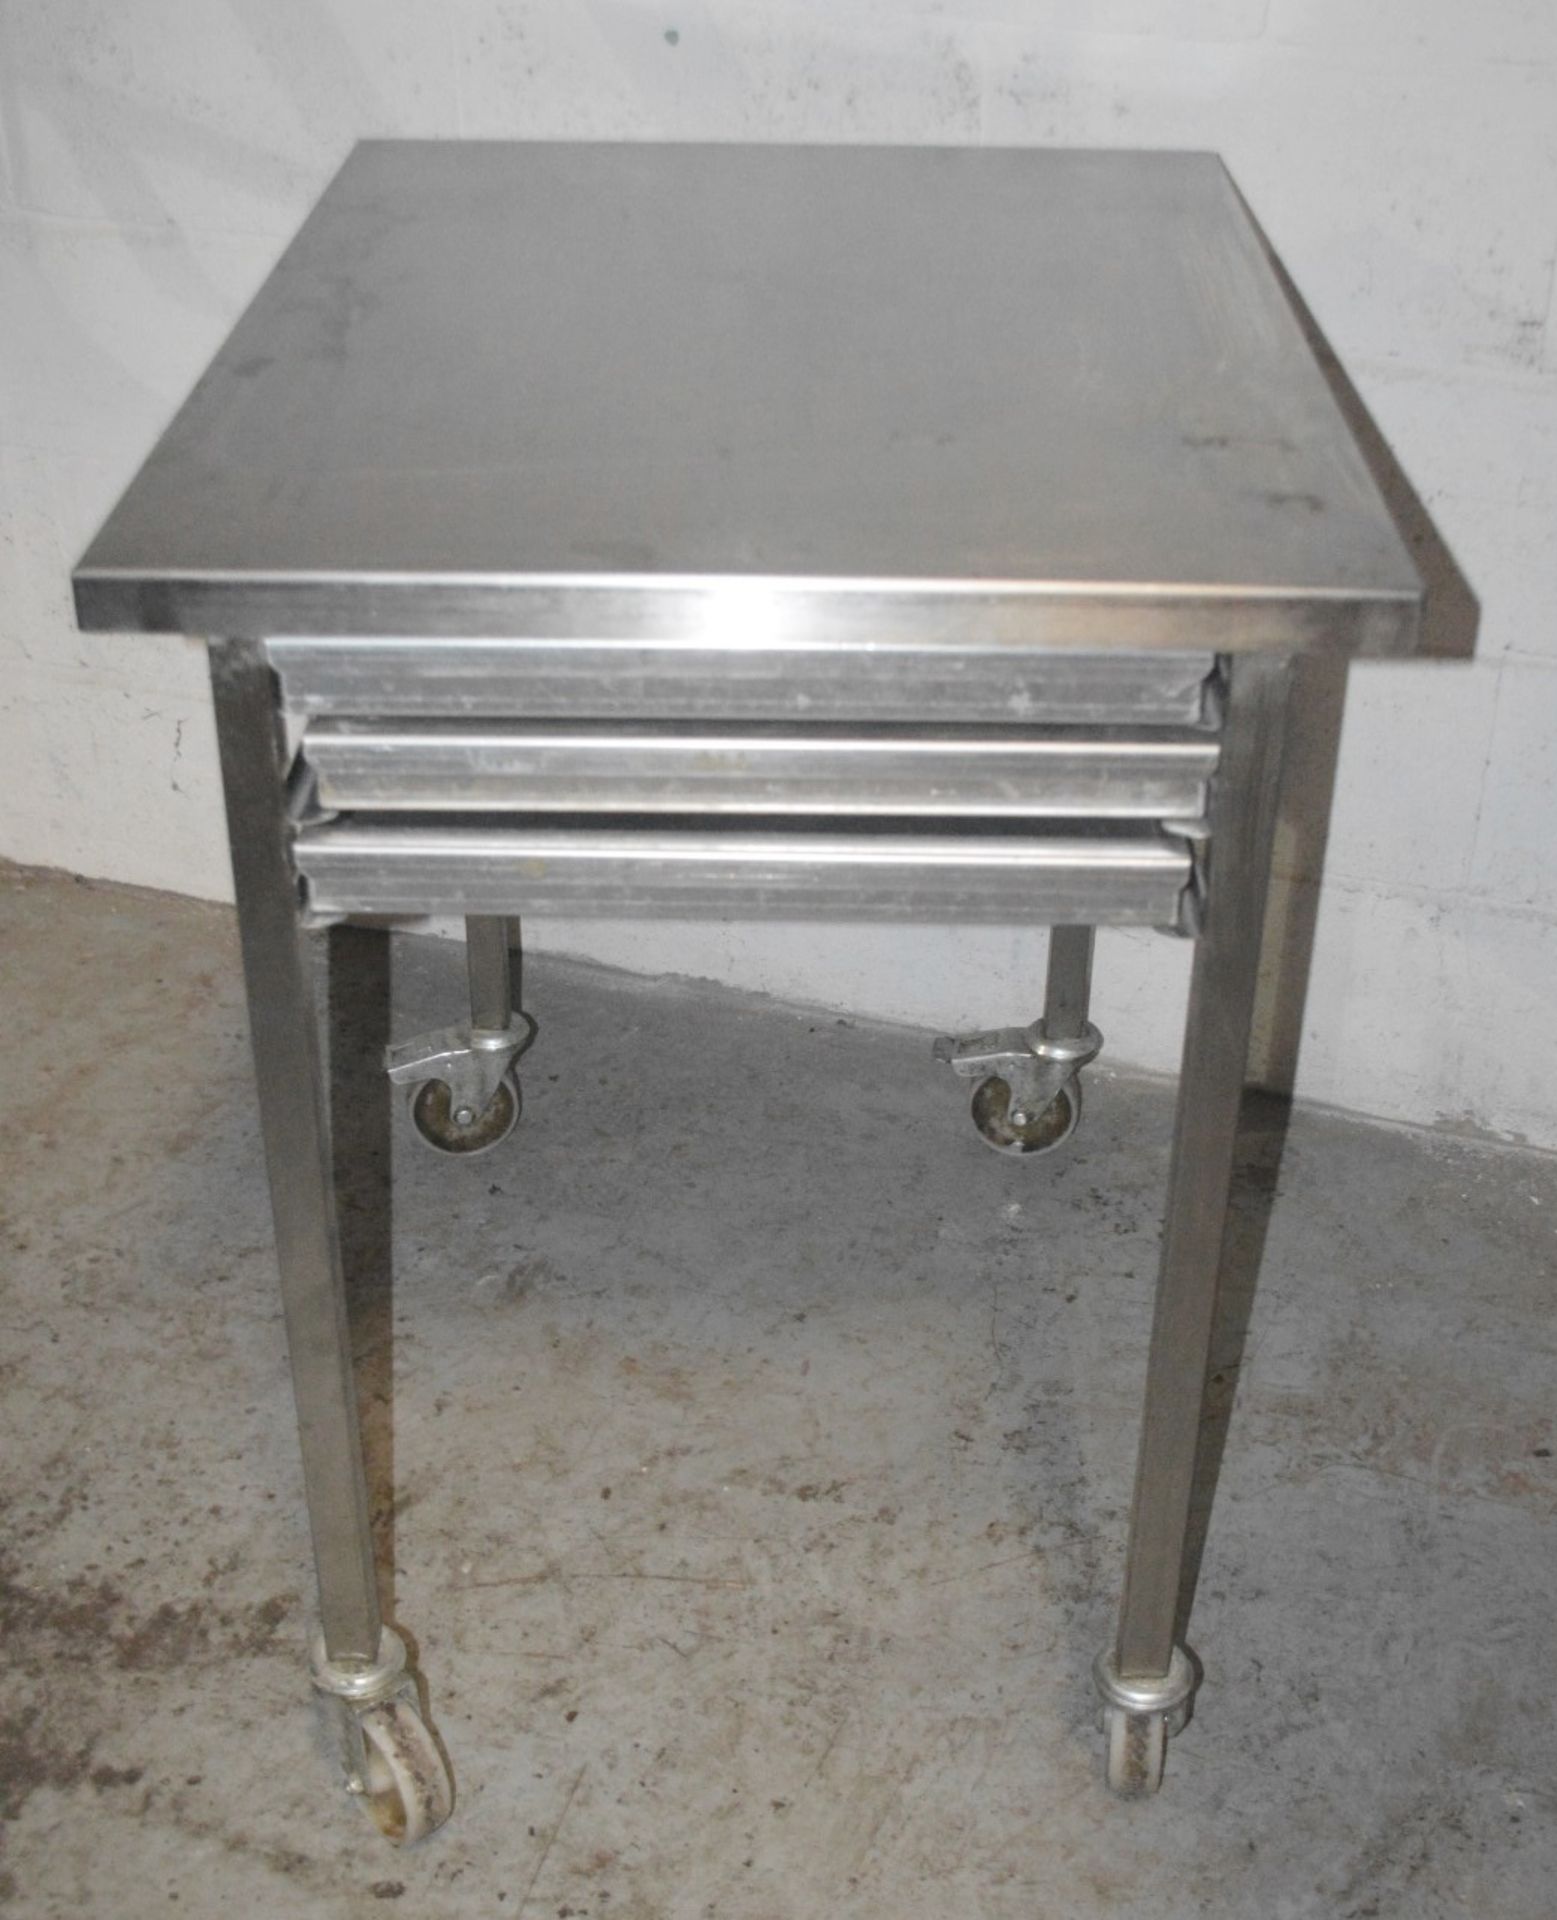 1 x Stainless Steel Commercial Kitchen 3-Drawer Prep Counter On Castors - Dimensions: H87 x W84 x